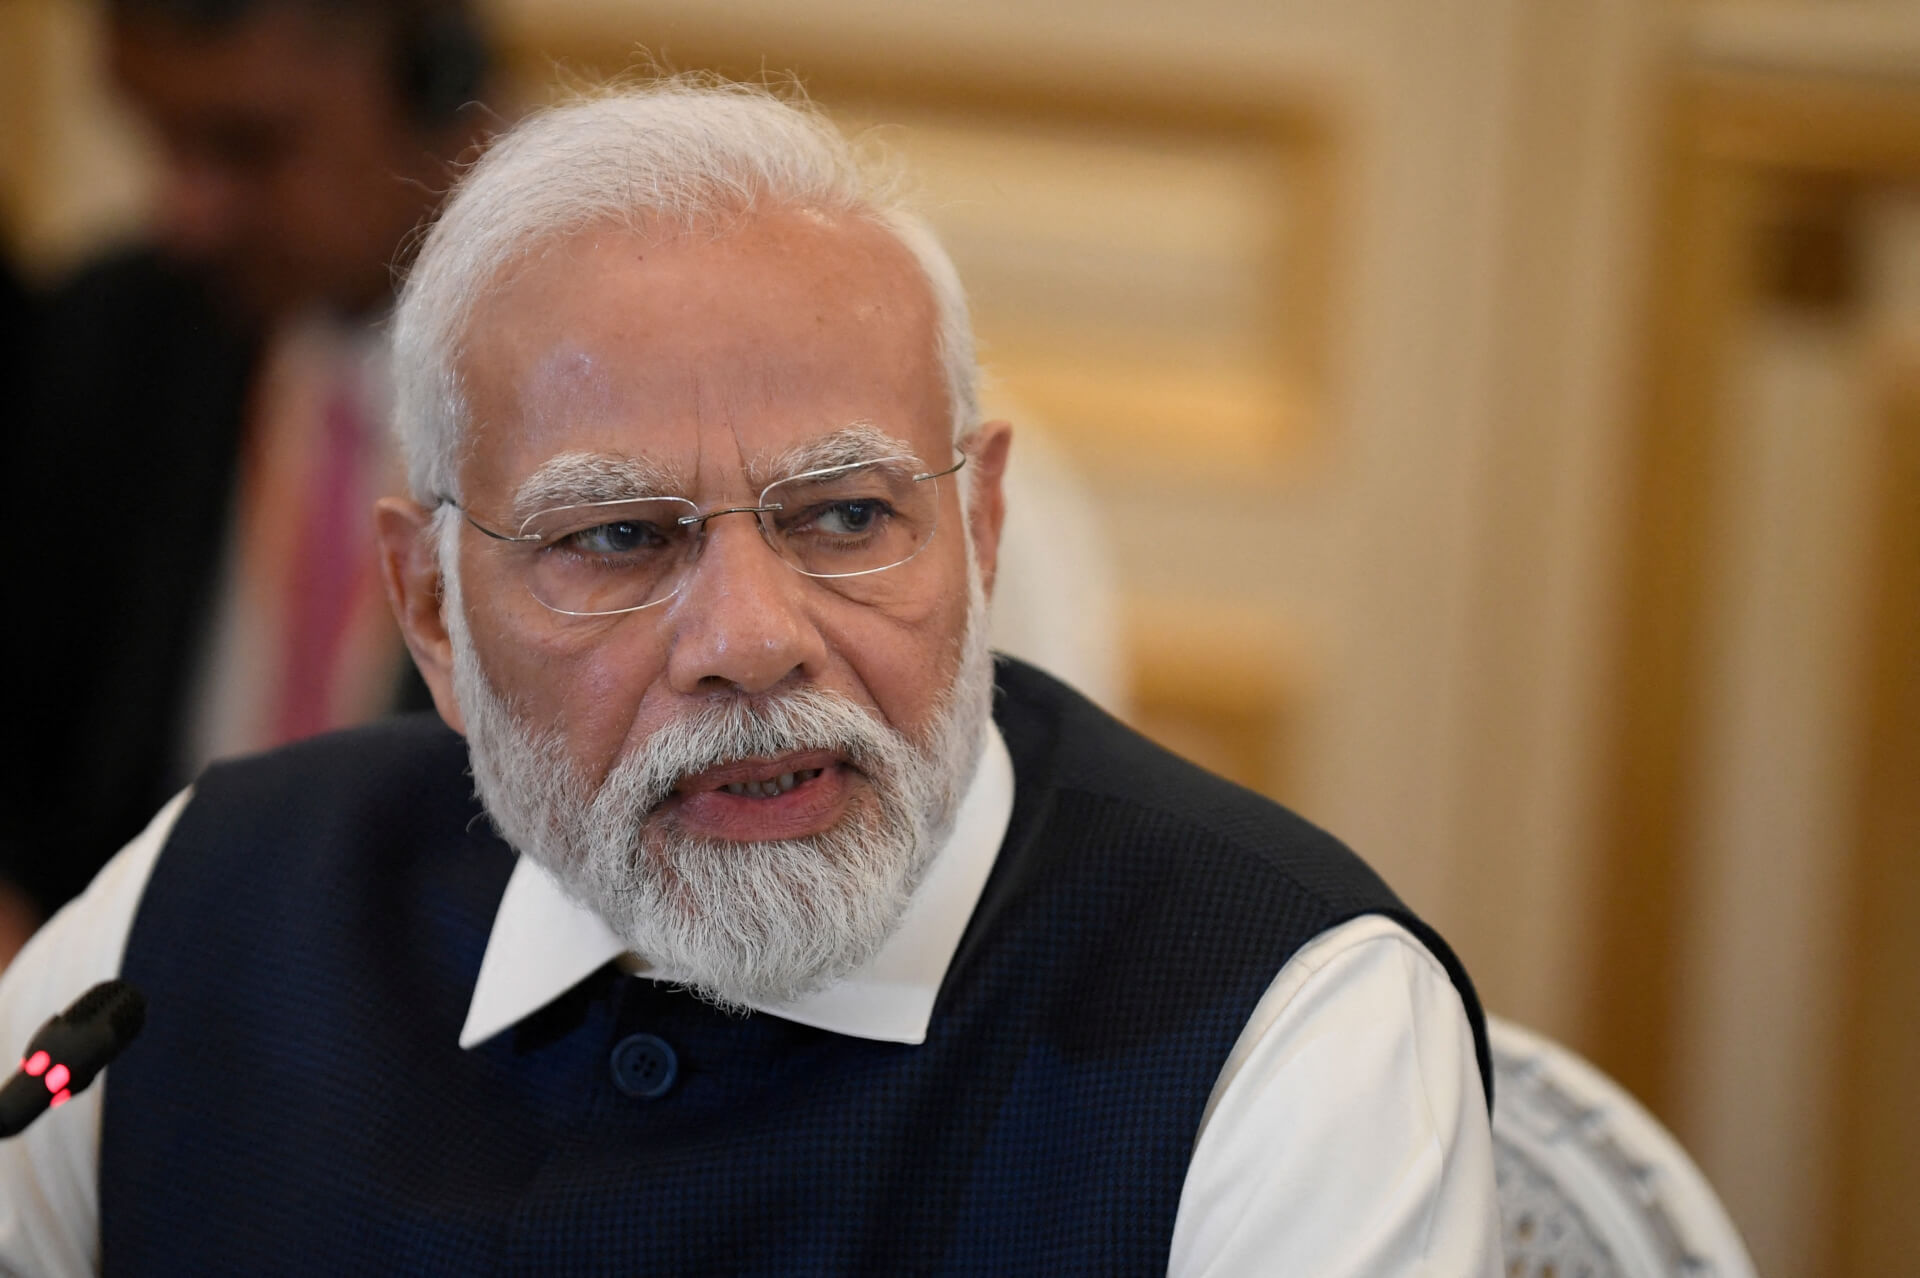 PM Modi Will Not Visit South Africa to Attend BRICS Summit, May Participate Virtually: Reuters